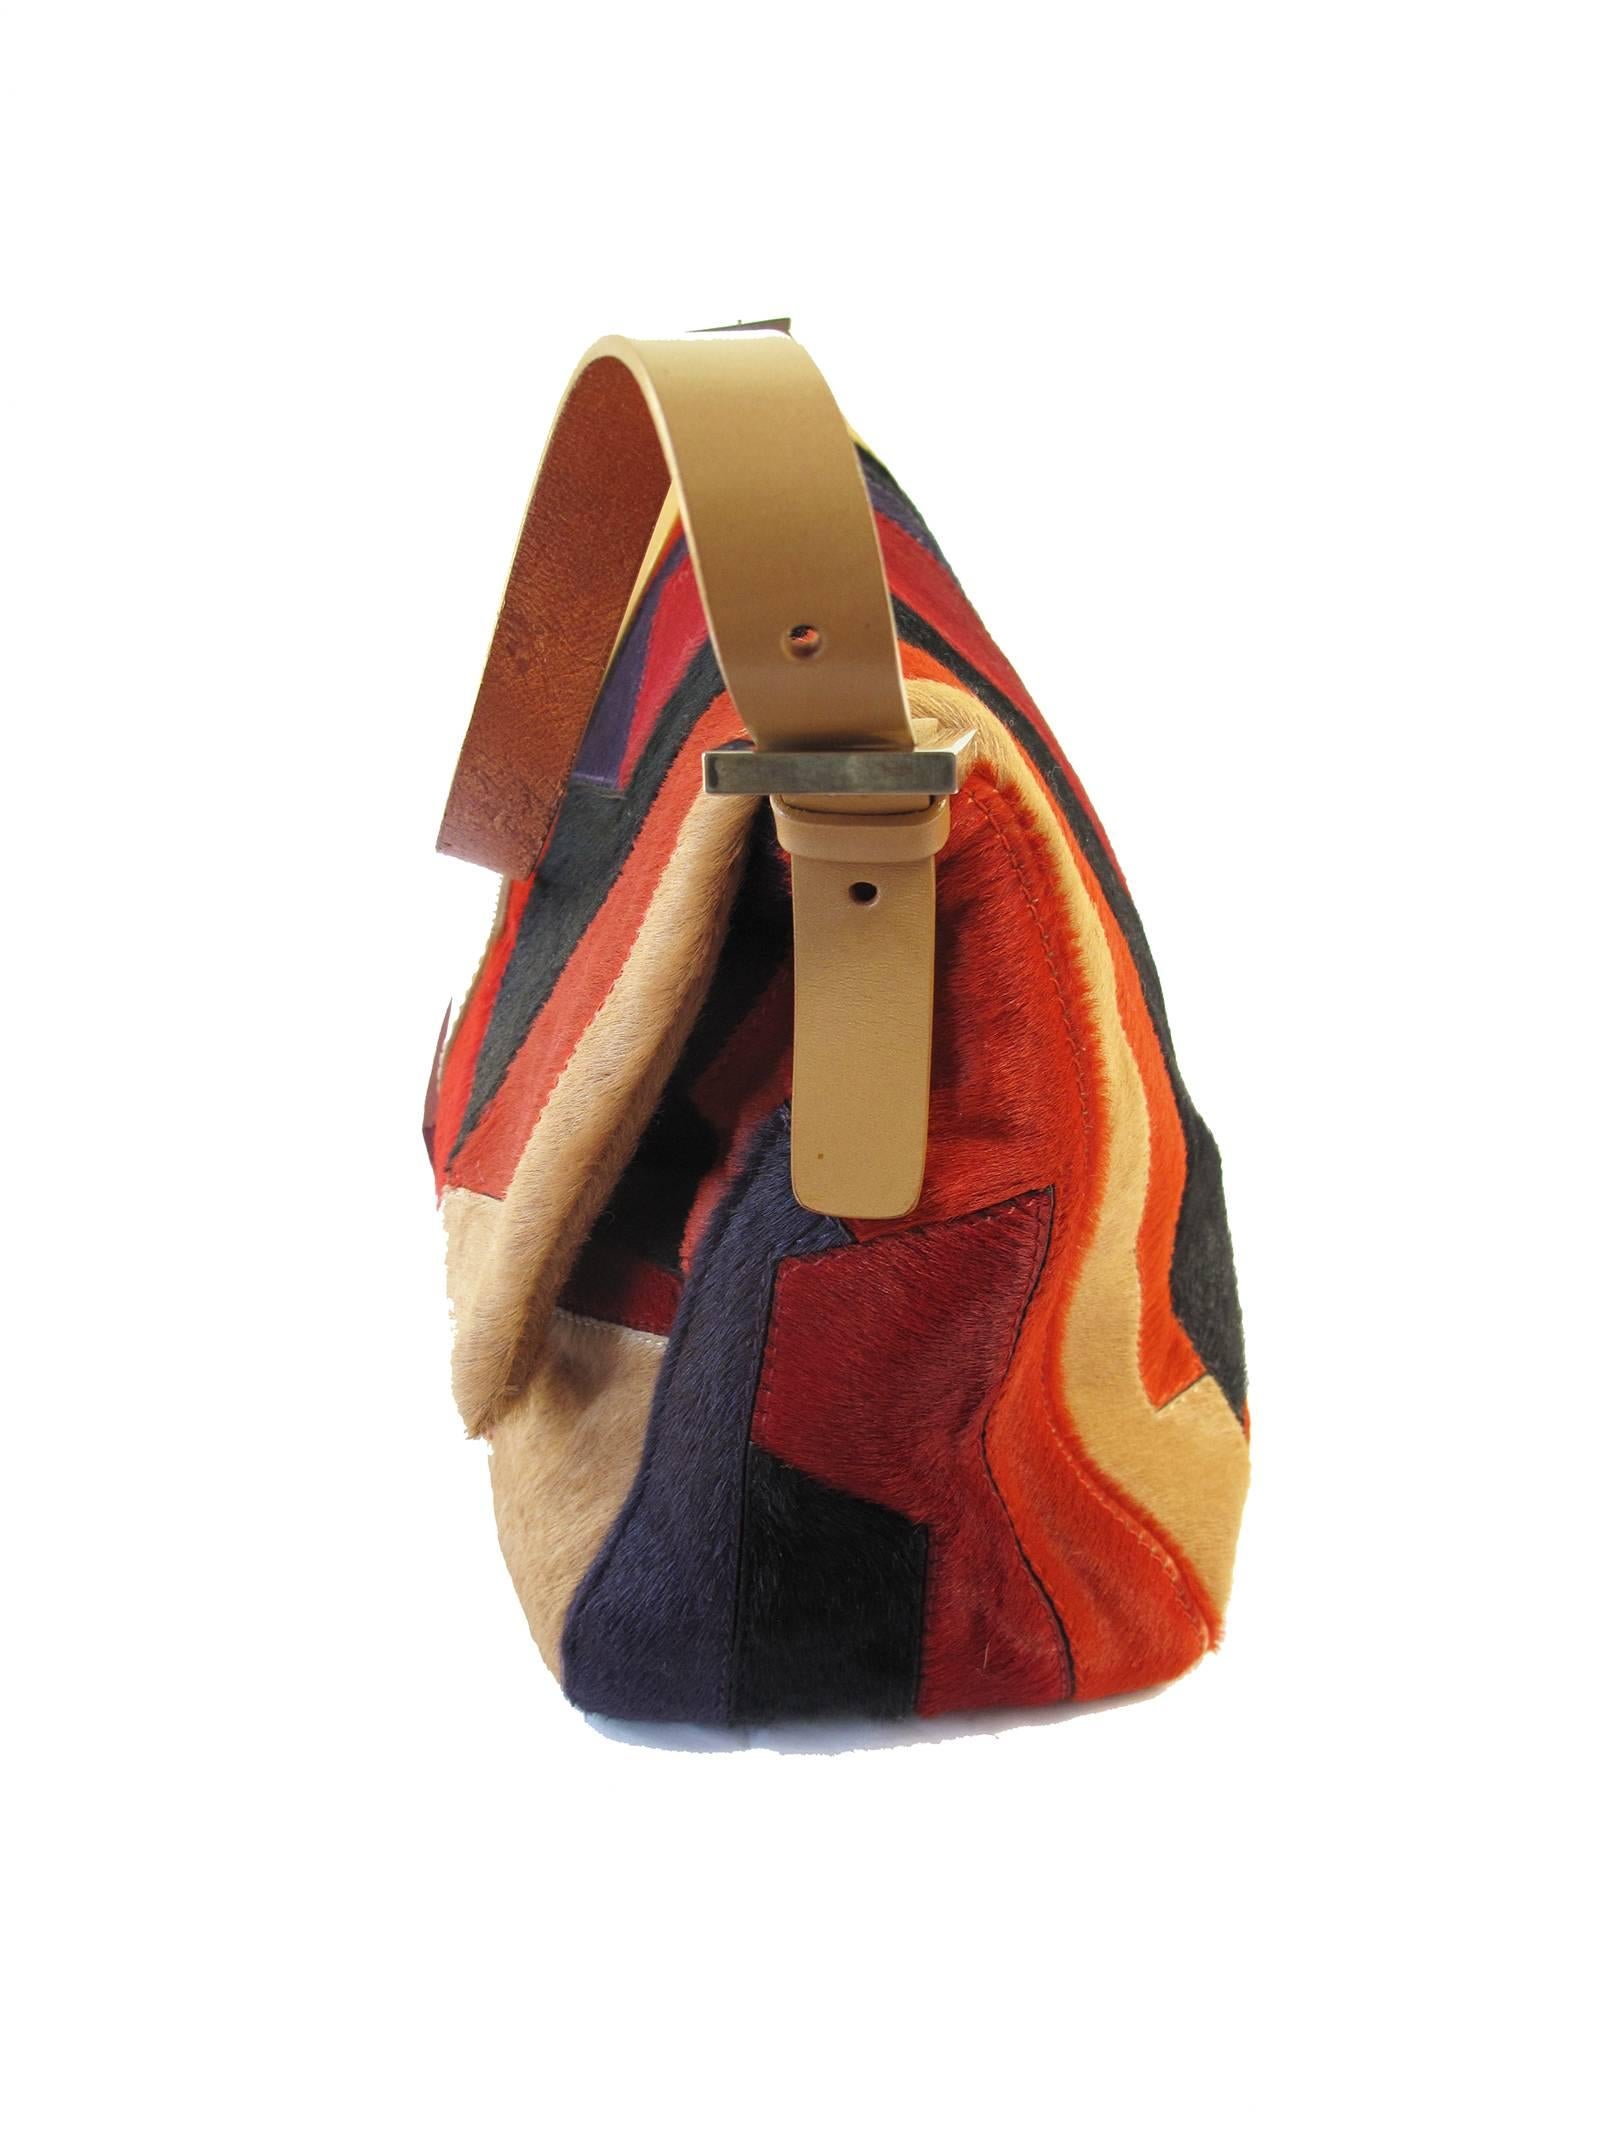 Fendi pony geometric bag, red, black, purple, beige.  Condition: Good, two spots were pony is worn, see photos. 11 3/4